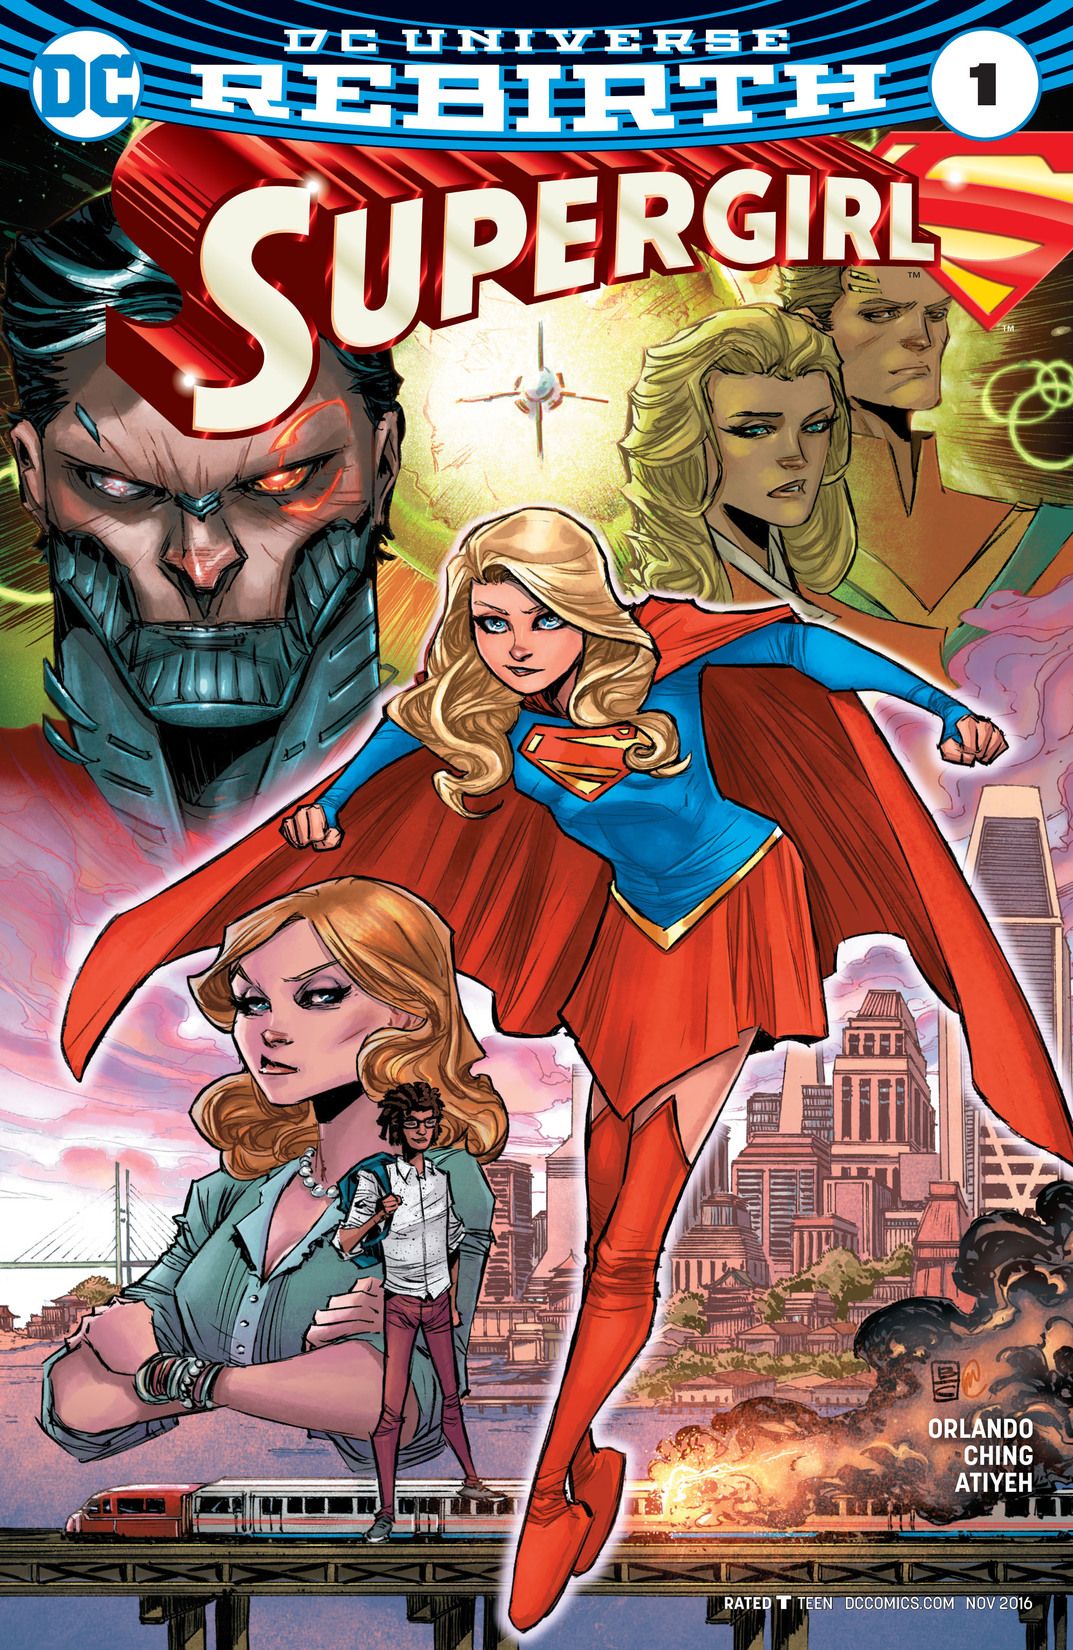 Supergirl #1 Review - A Promising Start